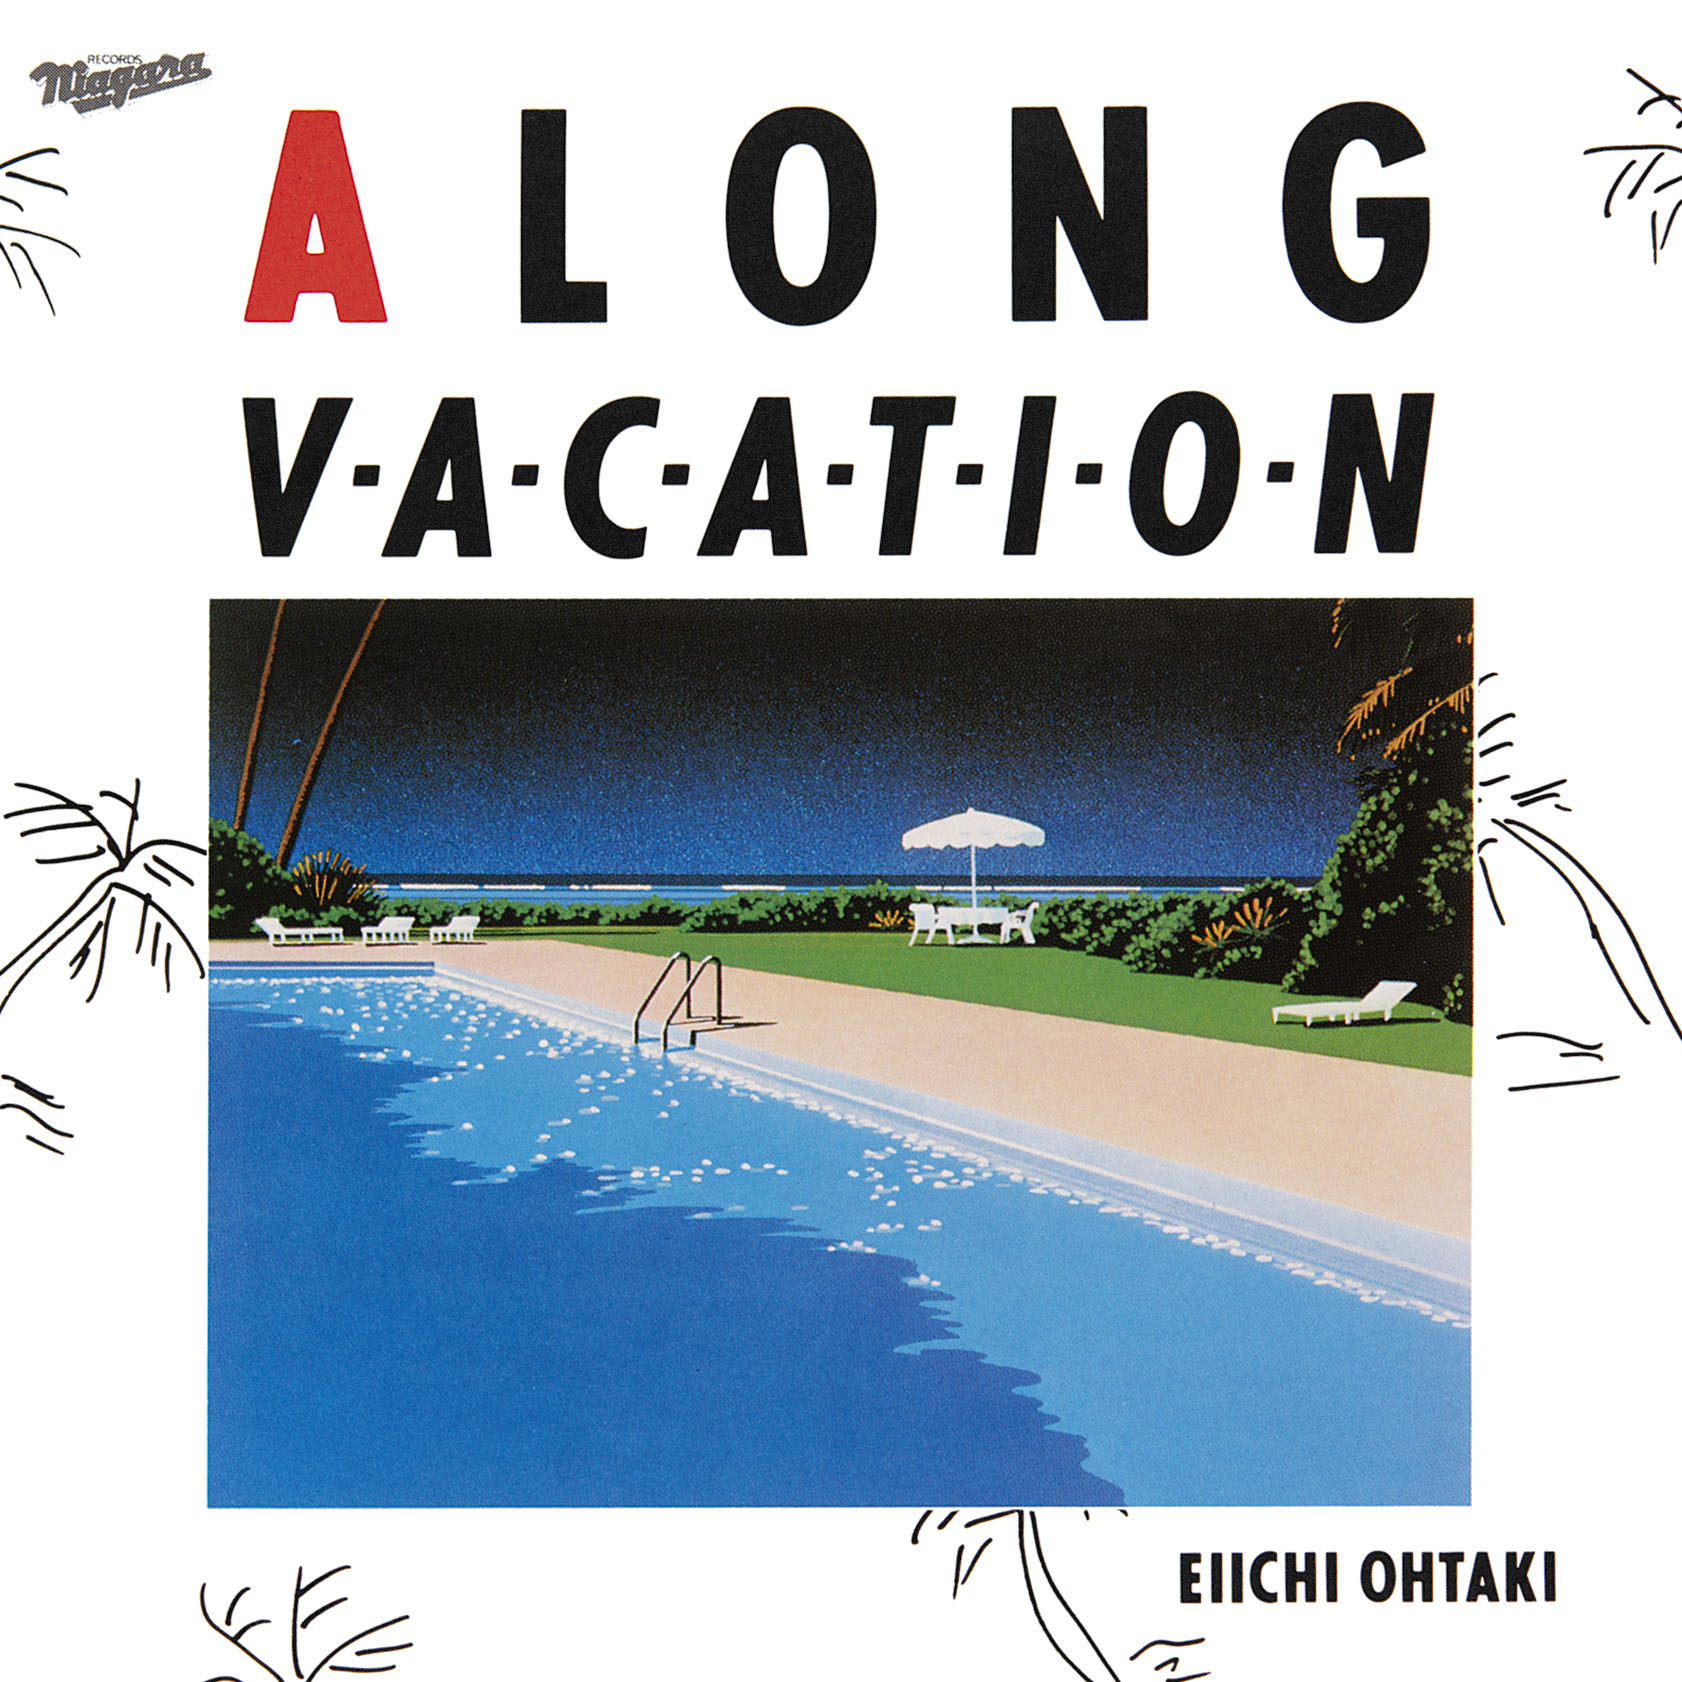 A Long Vacation - 40th Anniversary Edition (LP Vinyl) (Limited Edition)